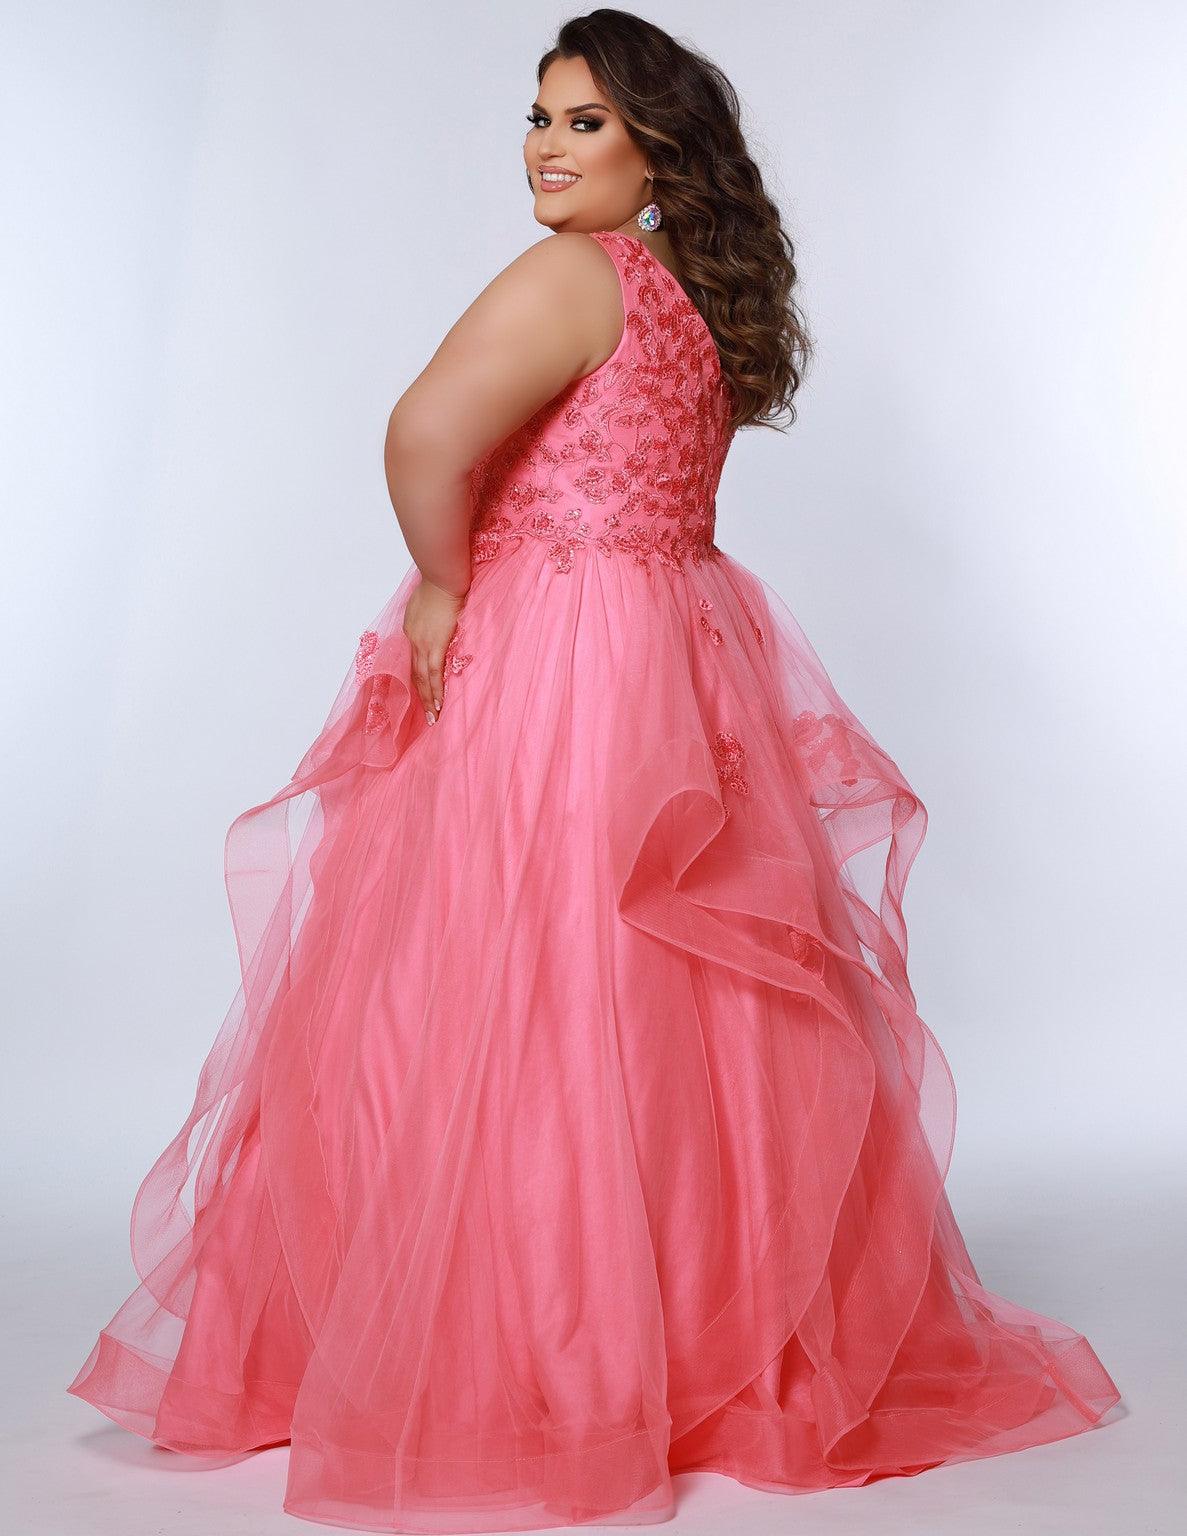 Plus Size Dresses Plus Size Long Sleeveless Prom Ball Gown Coral